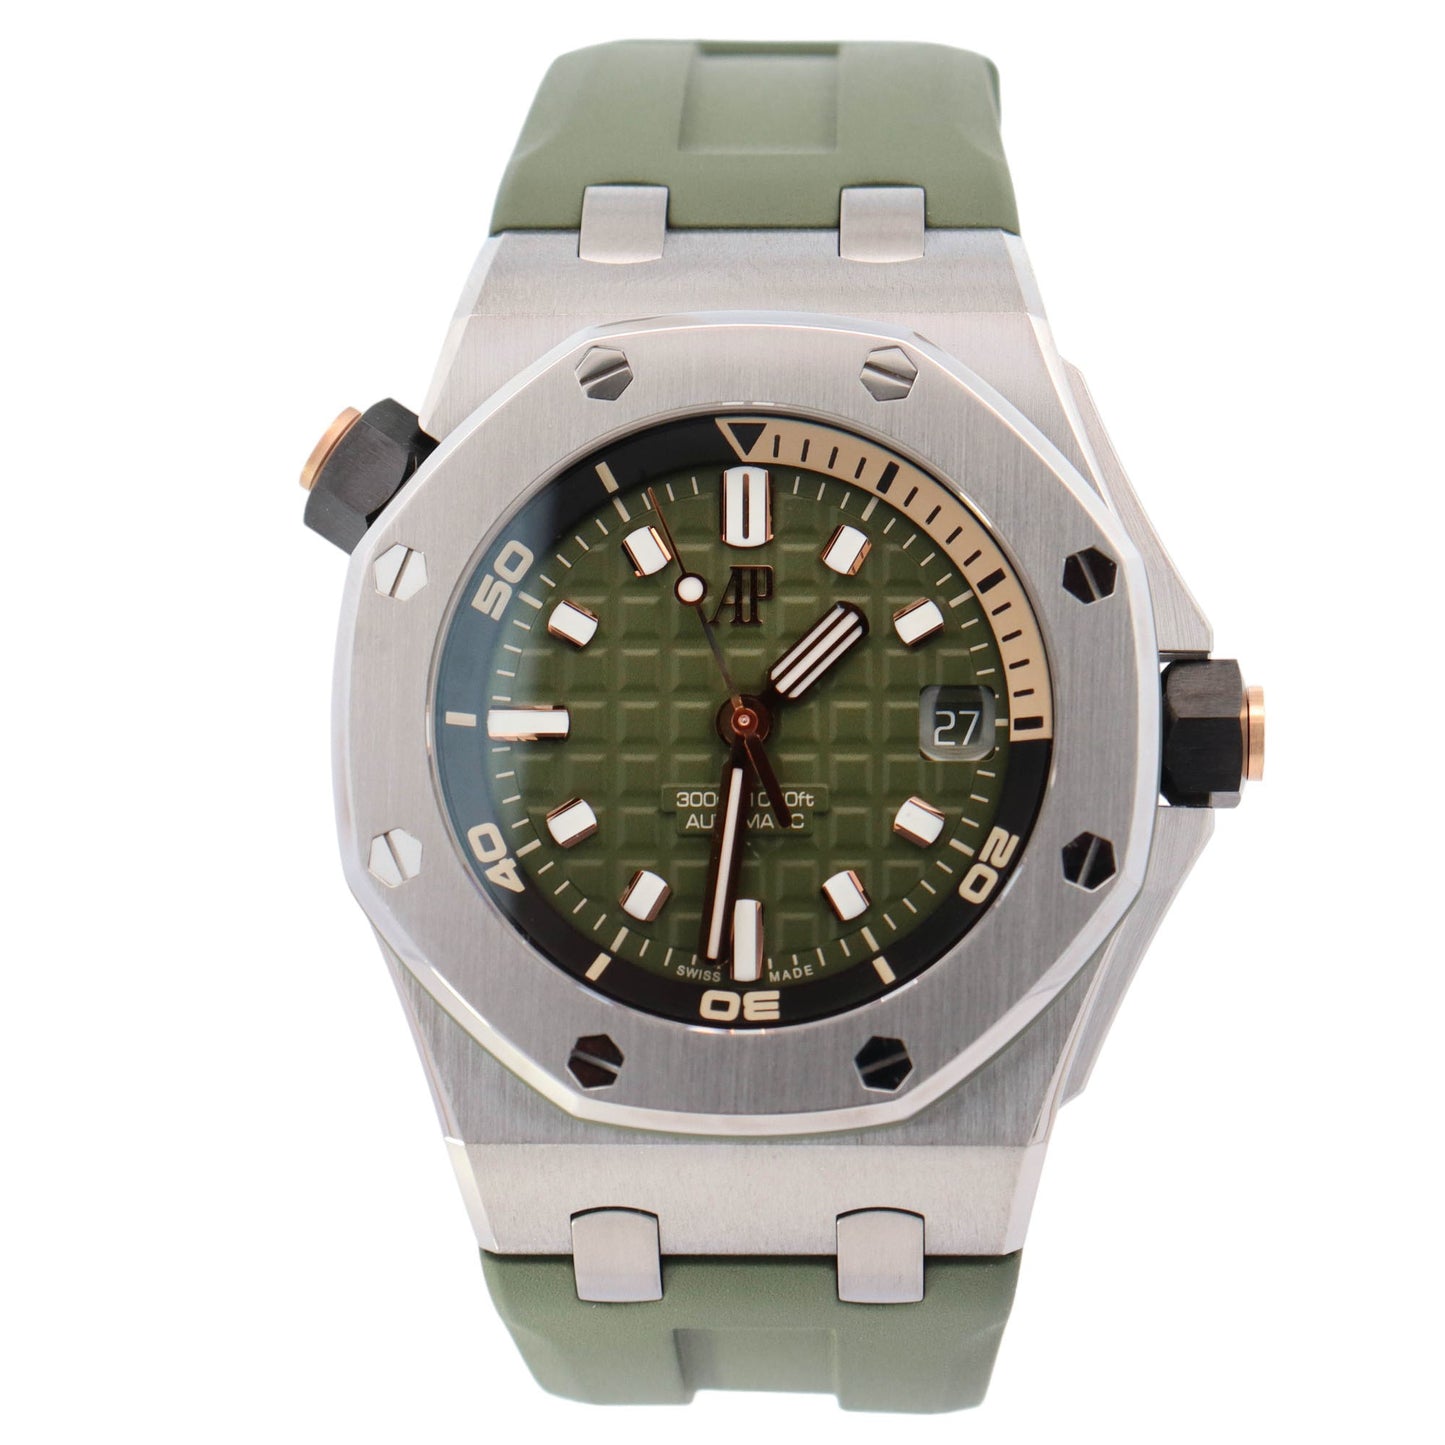 Audemar Piguet Royal Oak Offshore Diver Stainless Steel 42mm Green Stick Dial Watch Reference# 15720ST.OO.A052CA.01